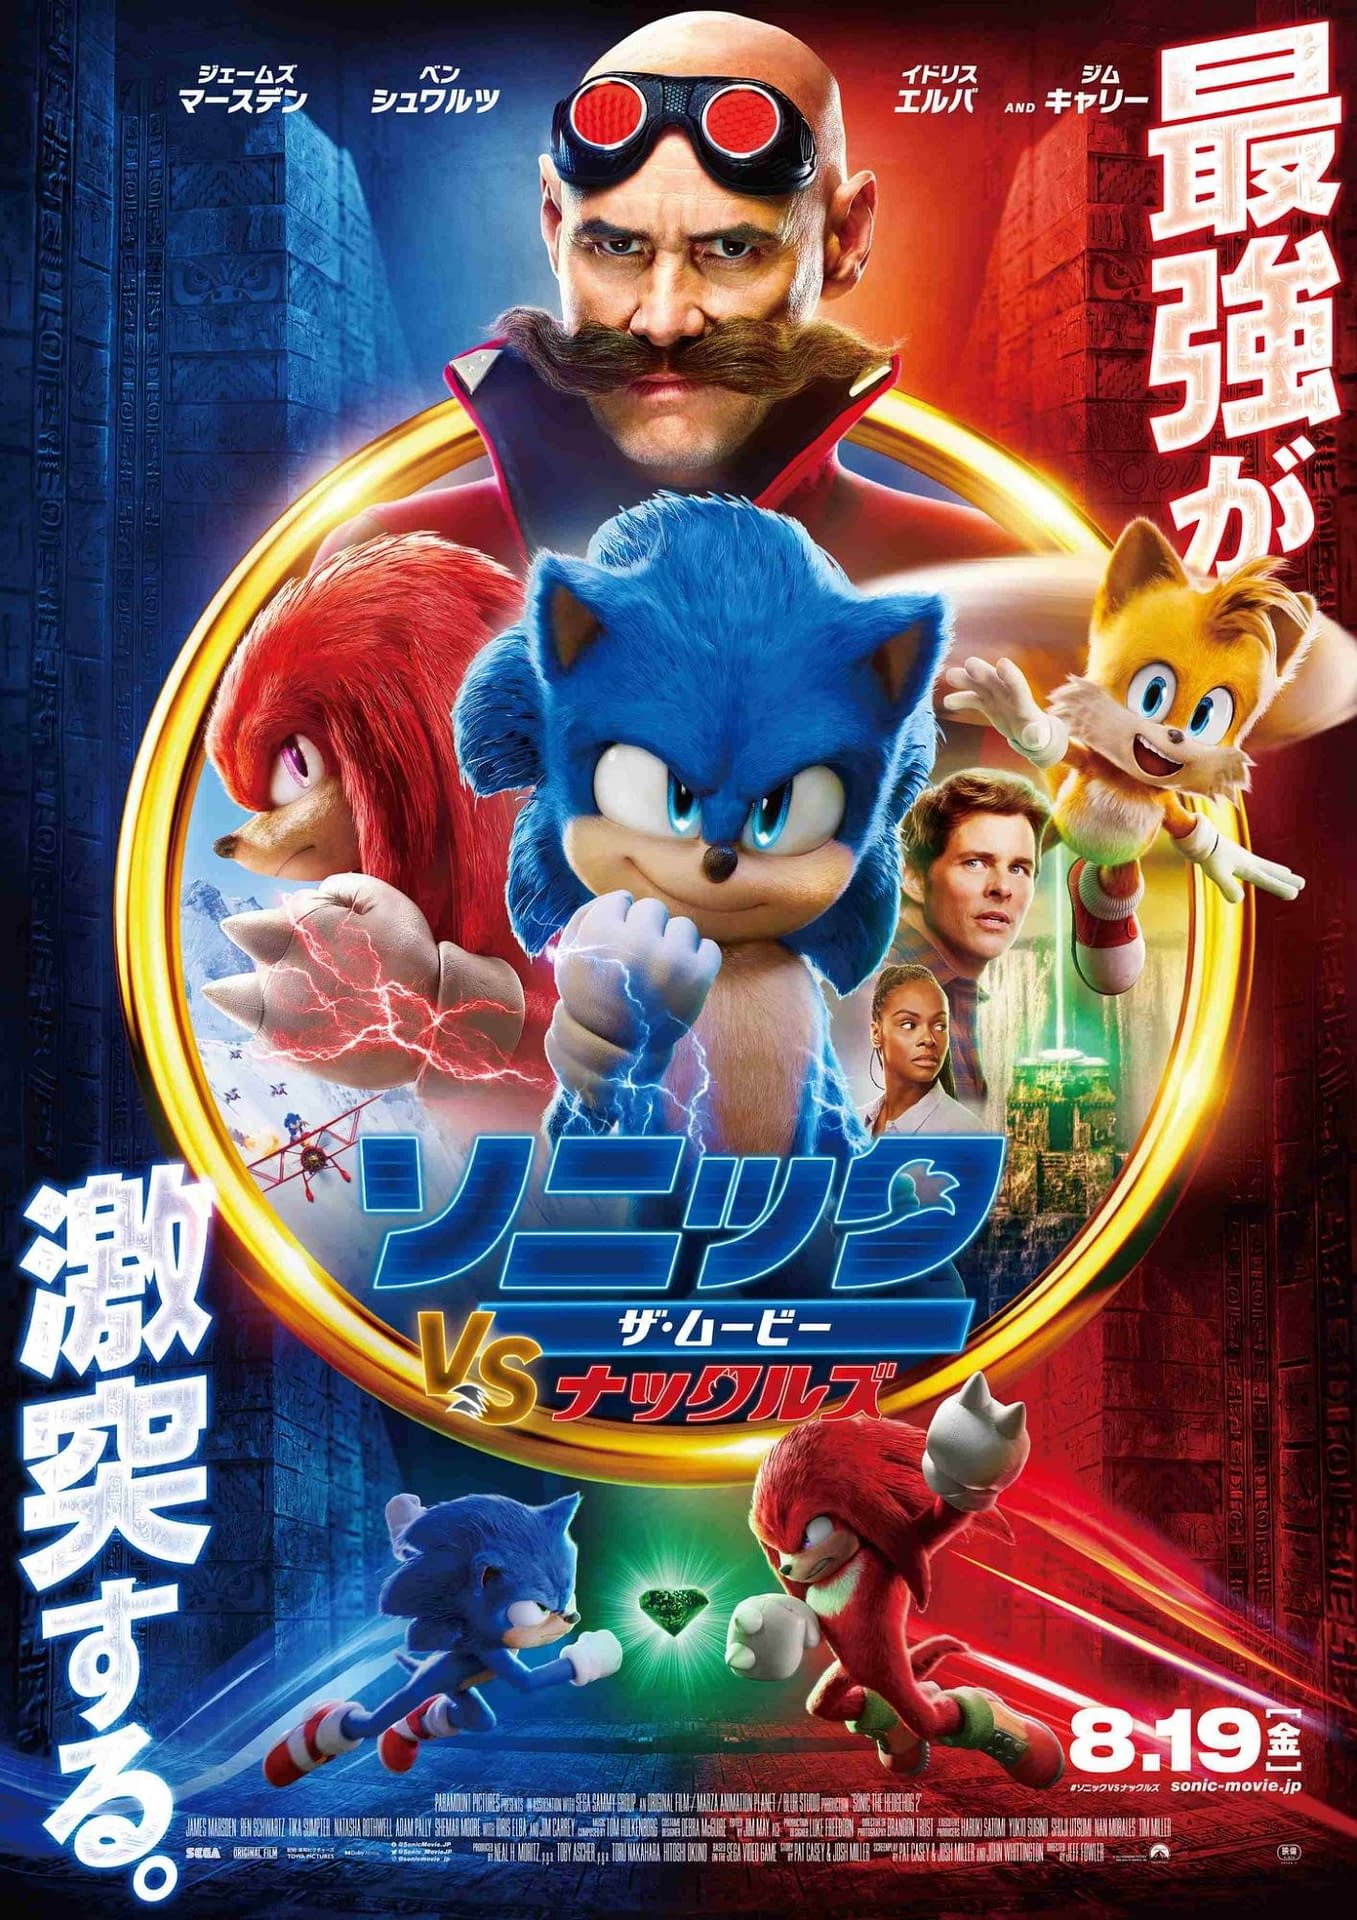 A Brand New International 'Sonic The Hedgehog' Poster Debuts - Heroic  Hollywood